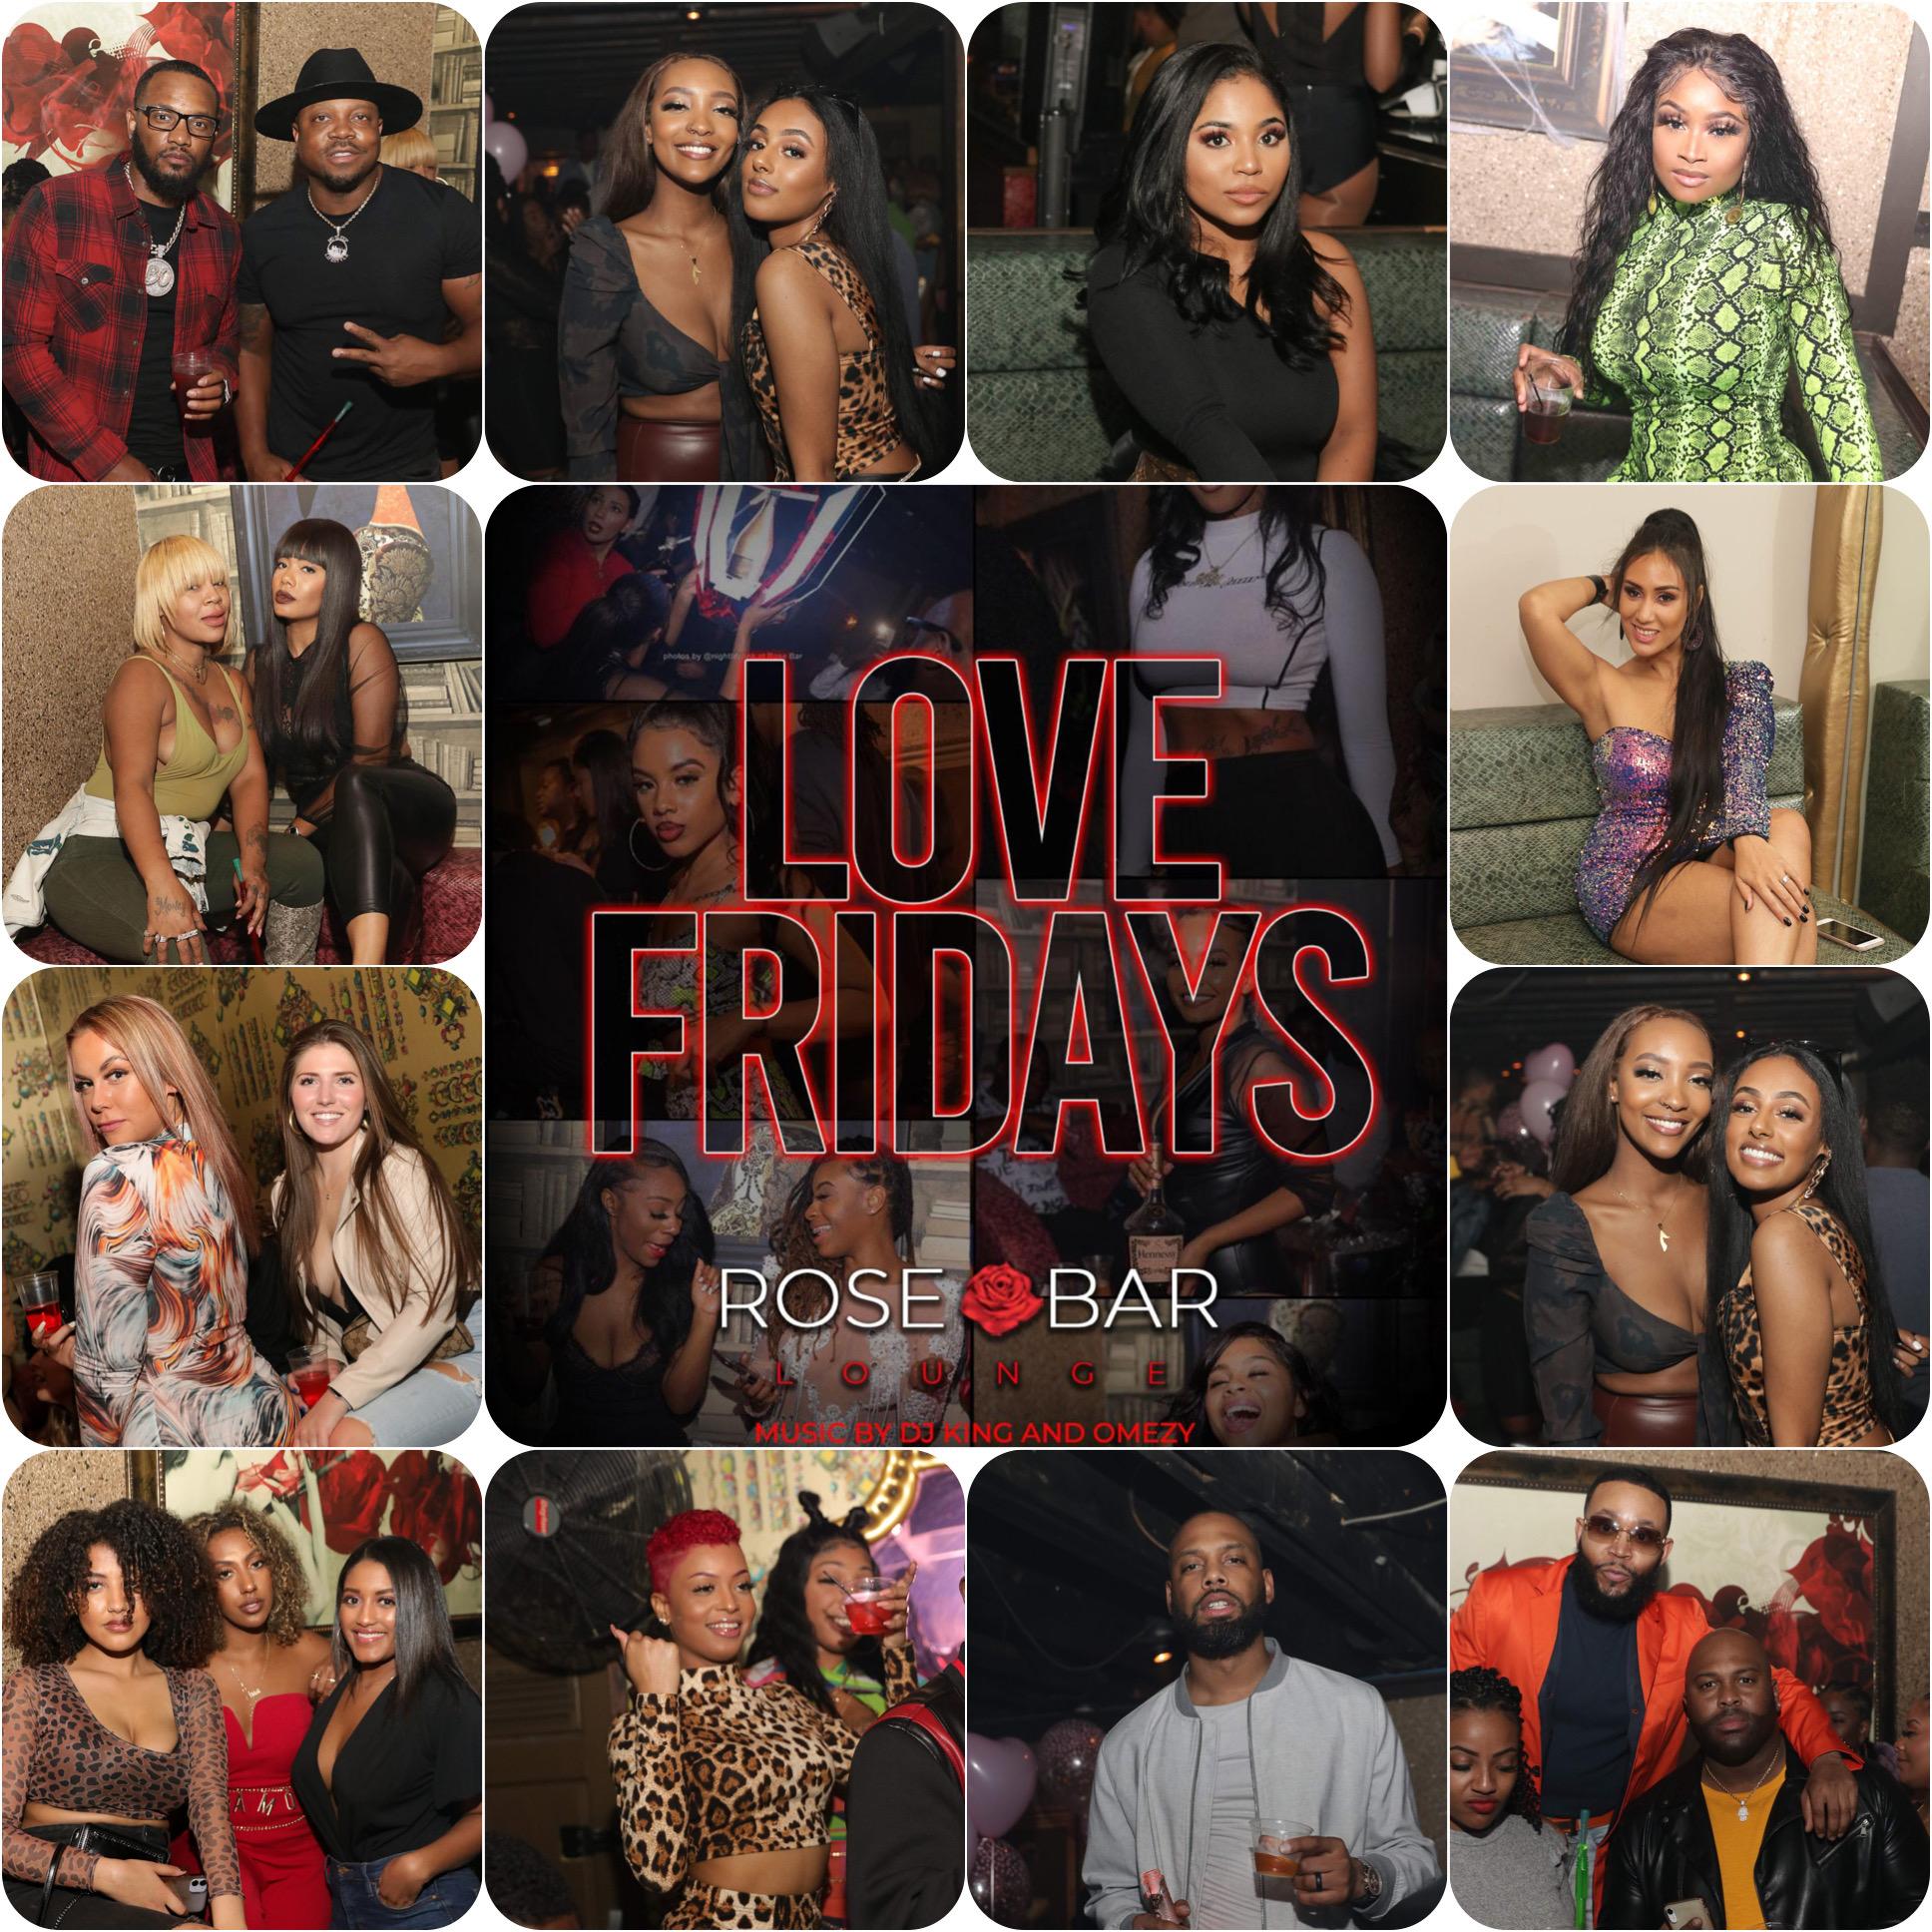 Love Friday's Upscale Hip Hop & RnB Party @Rose Bar